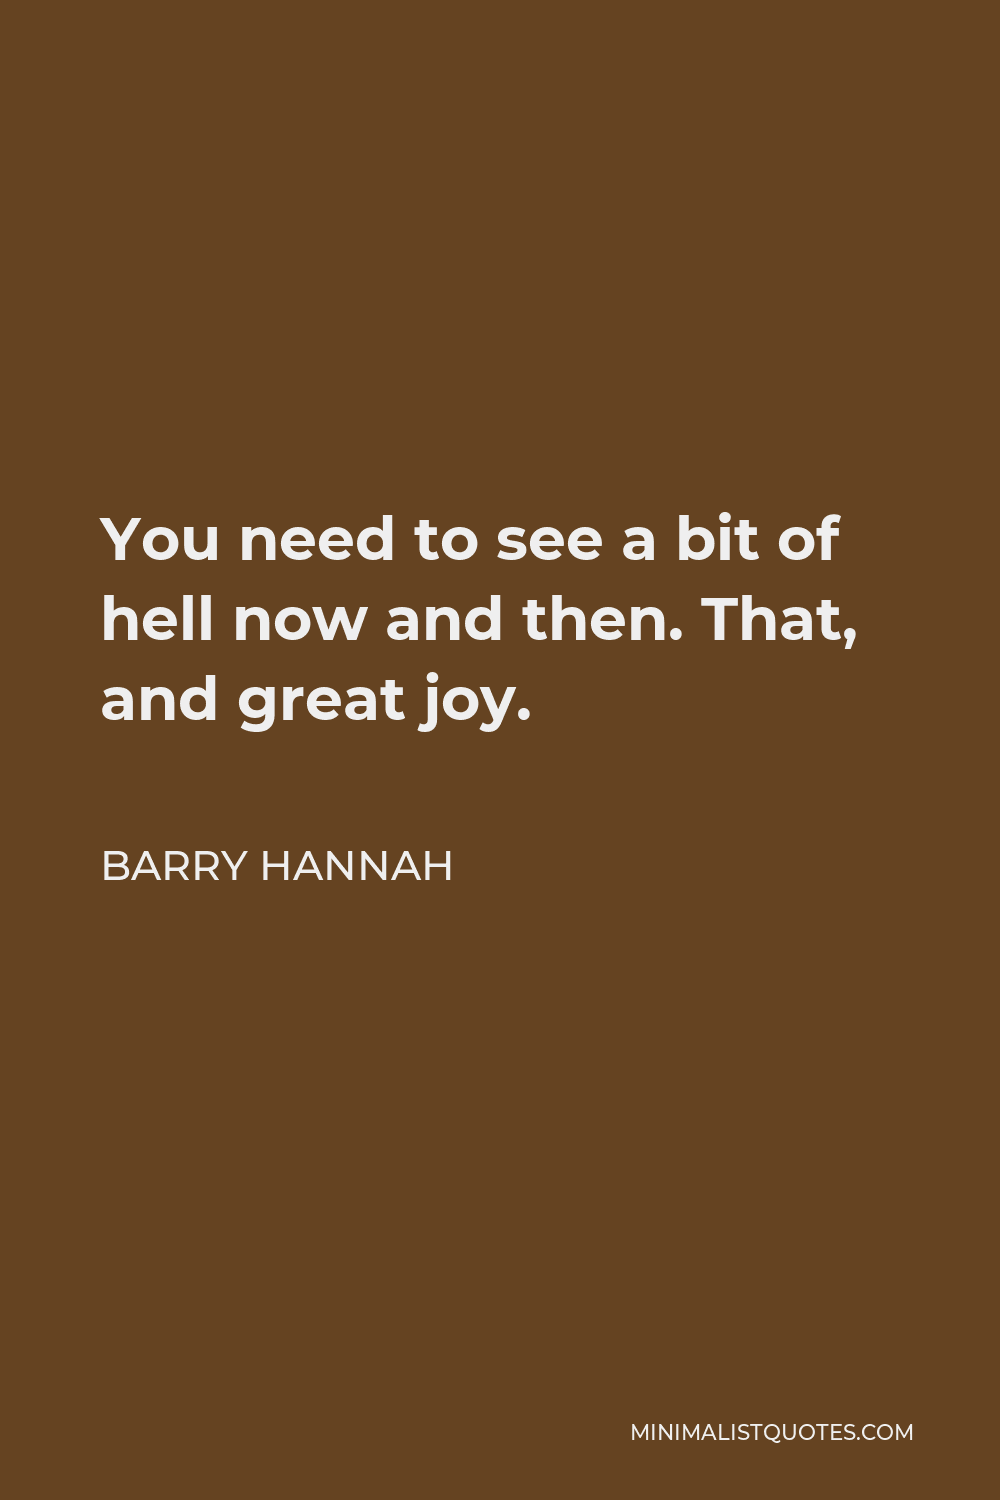 Barry Hannah Quote - You need to see a bit of hell now and then. That, and great joy.